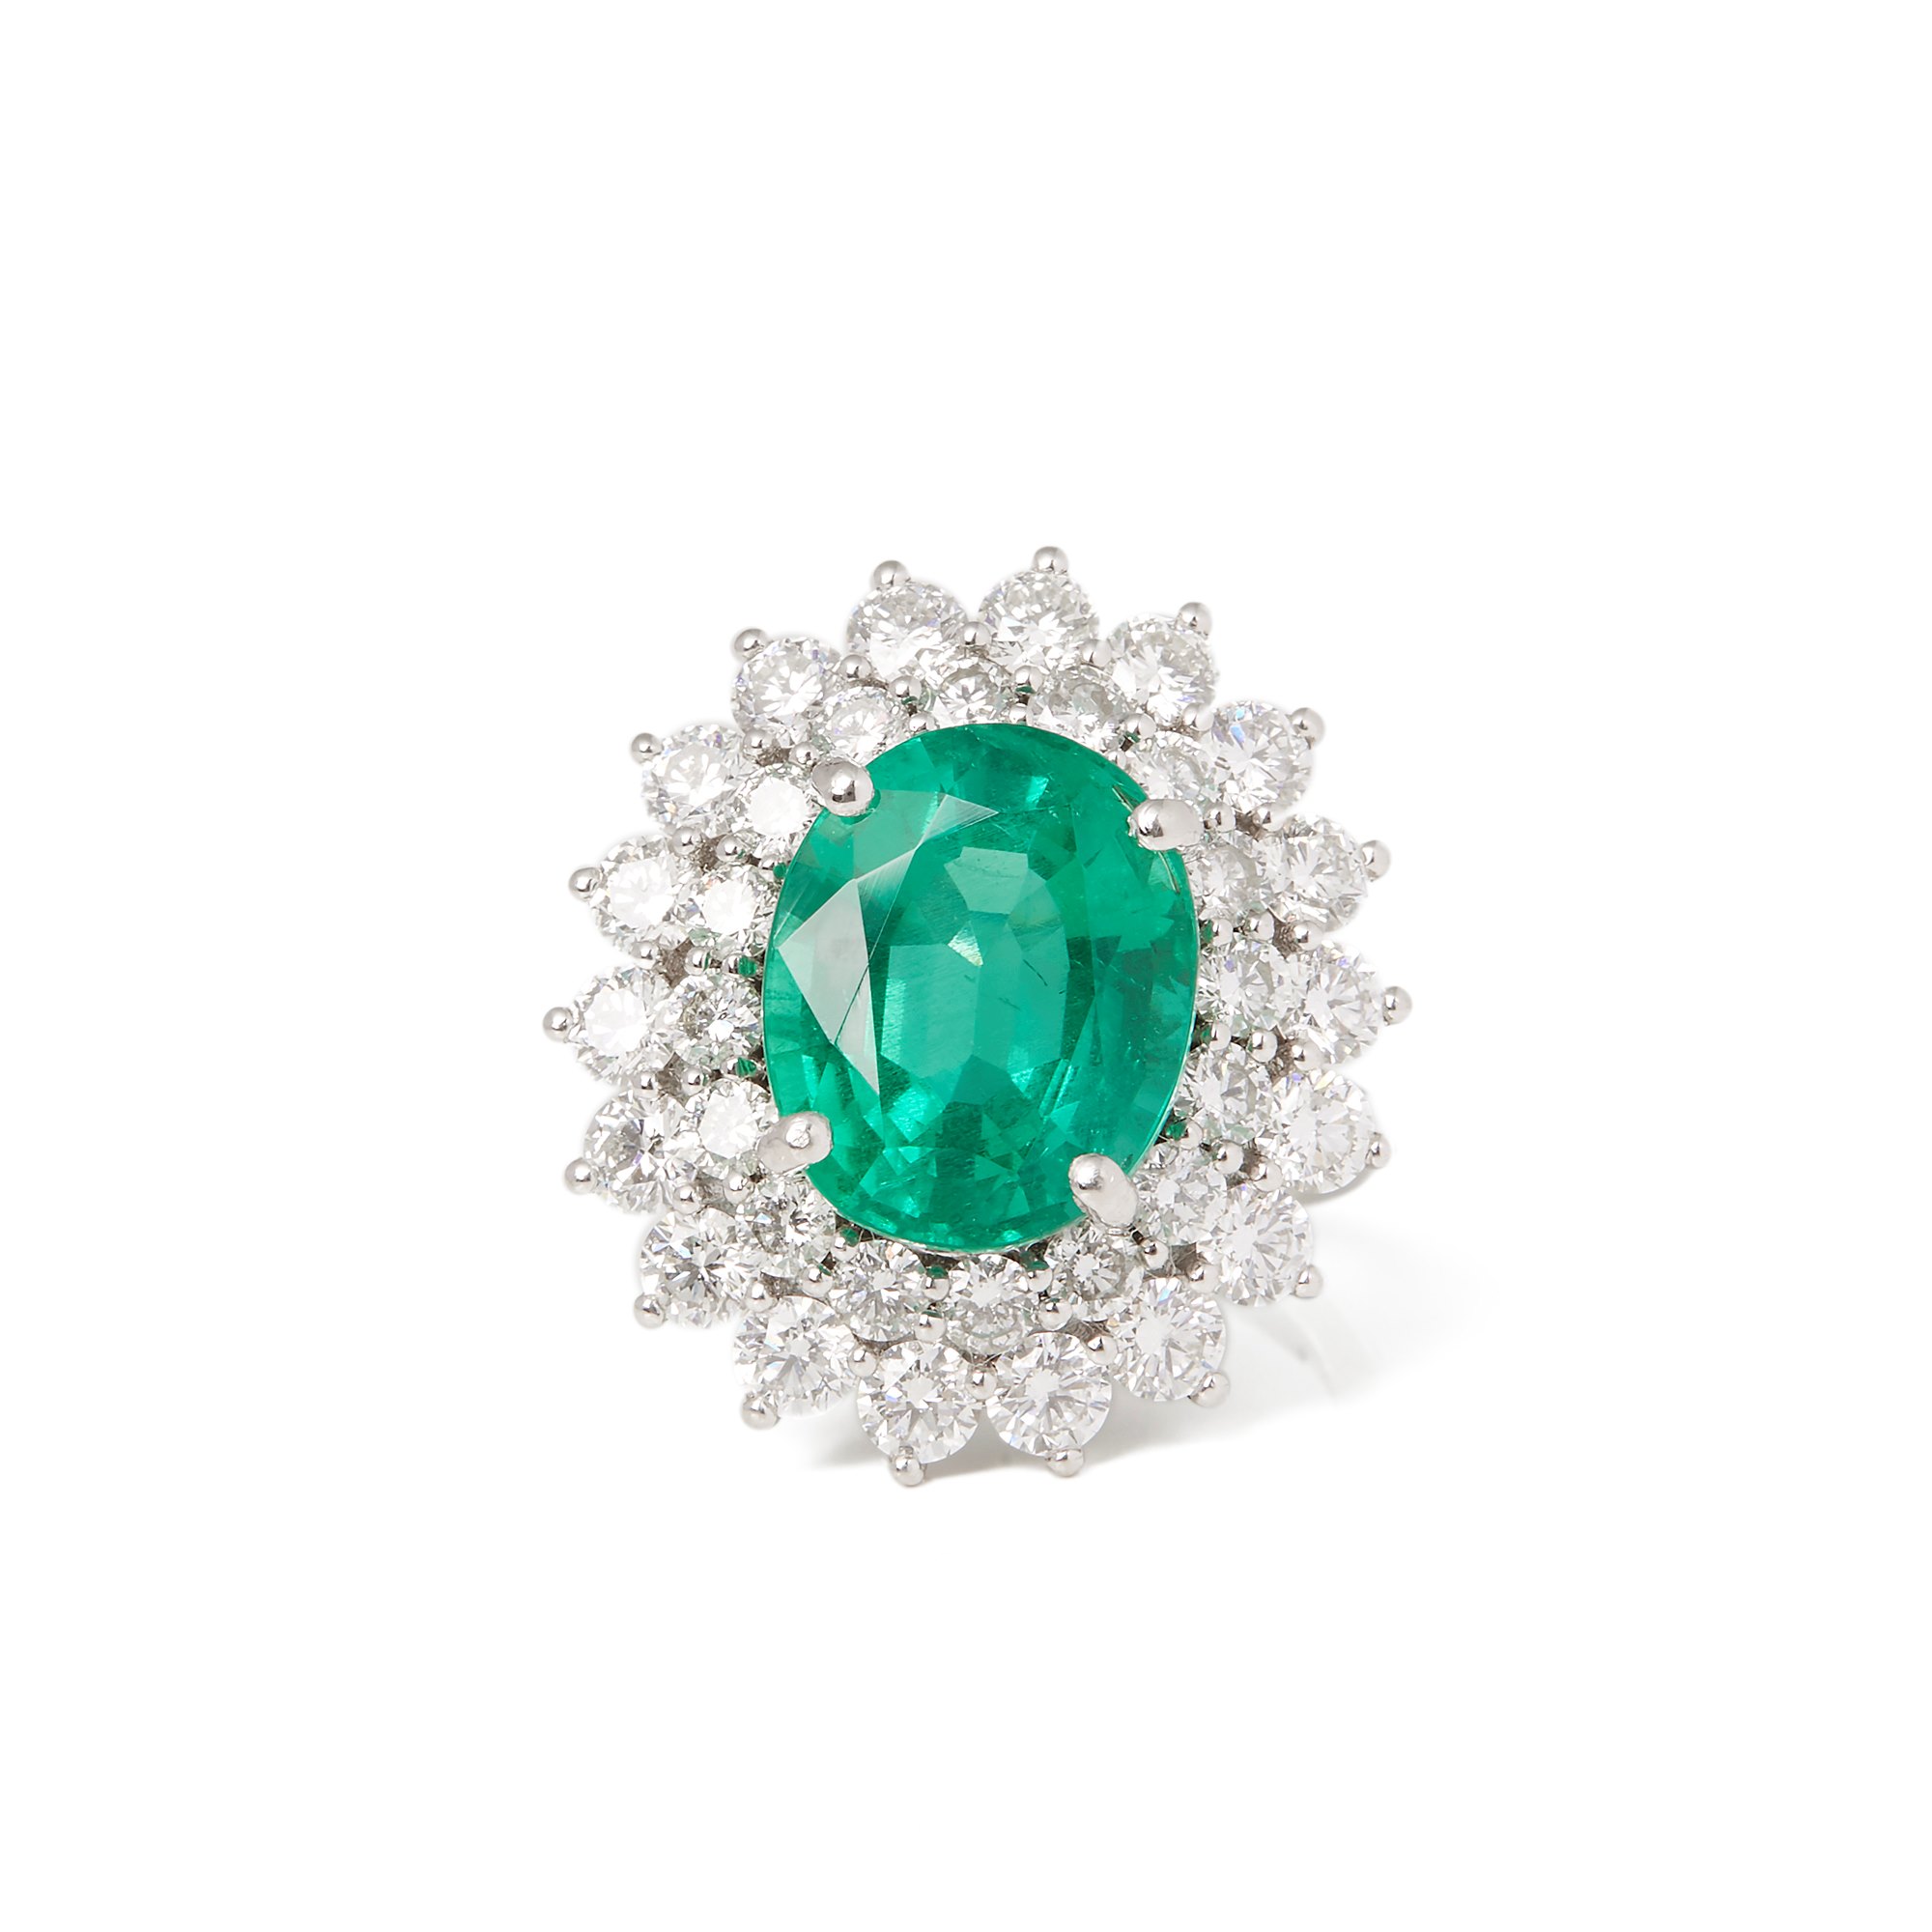 David Jerome Certified 6.42ct Untreated Oval cut Colombian Emerald and Diamond Platinum Ring